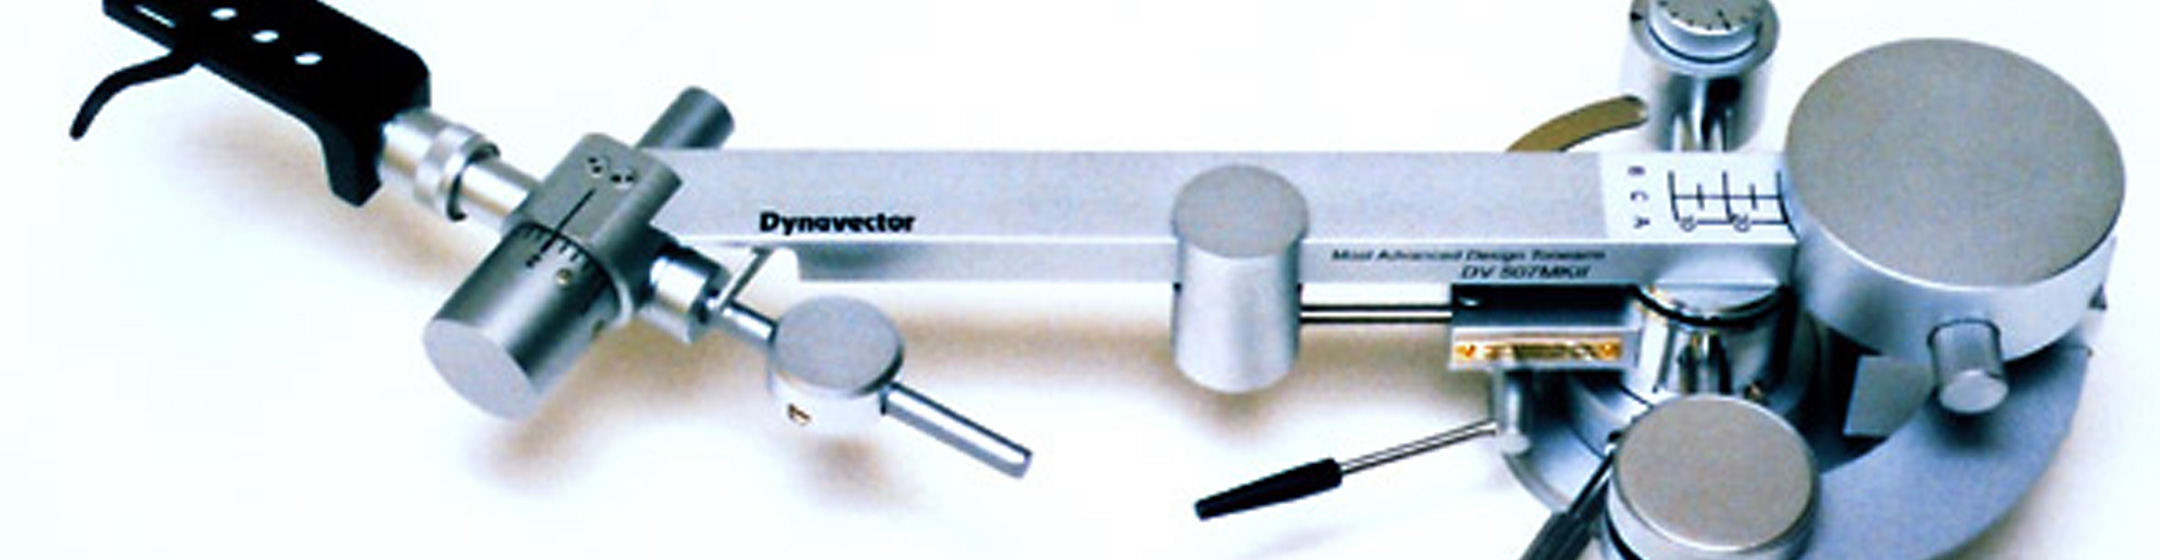 Pic of a Dynavector tonearm on a white background